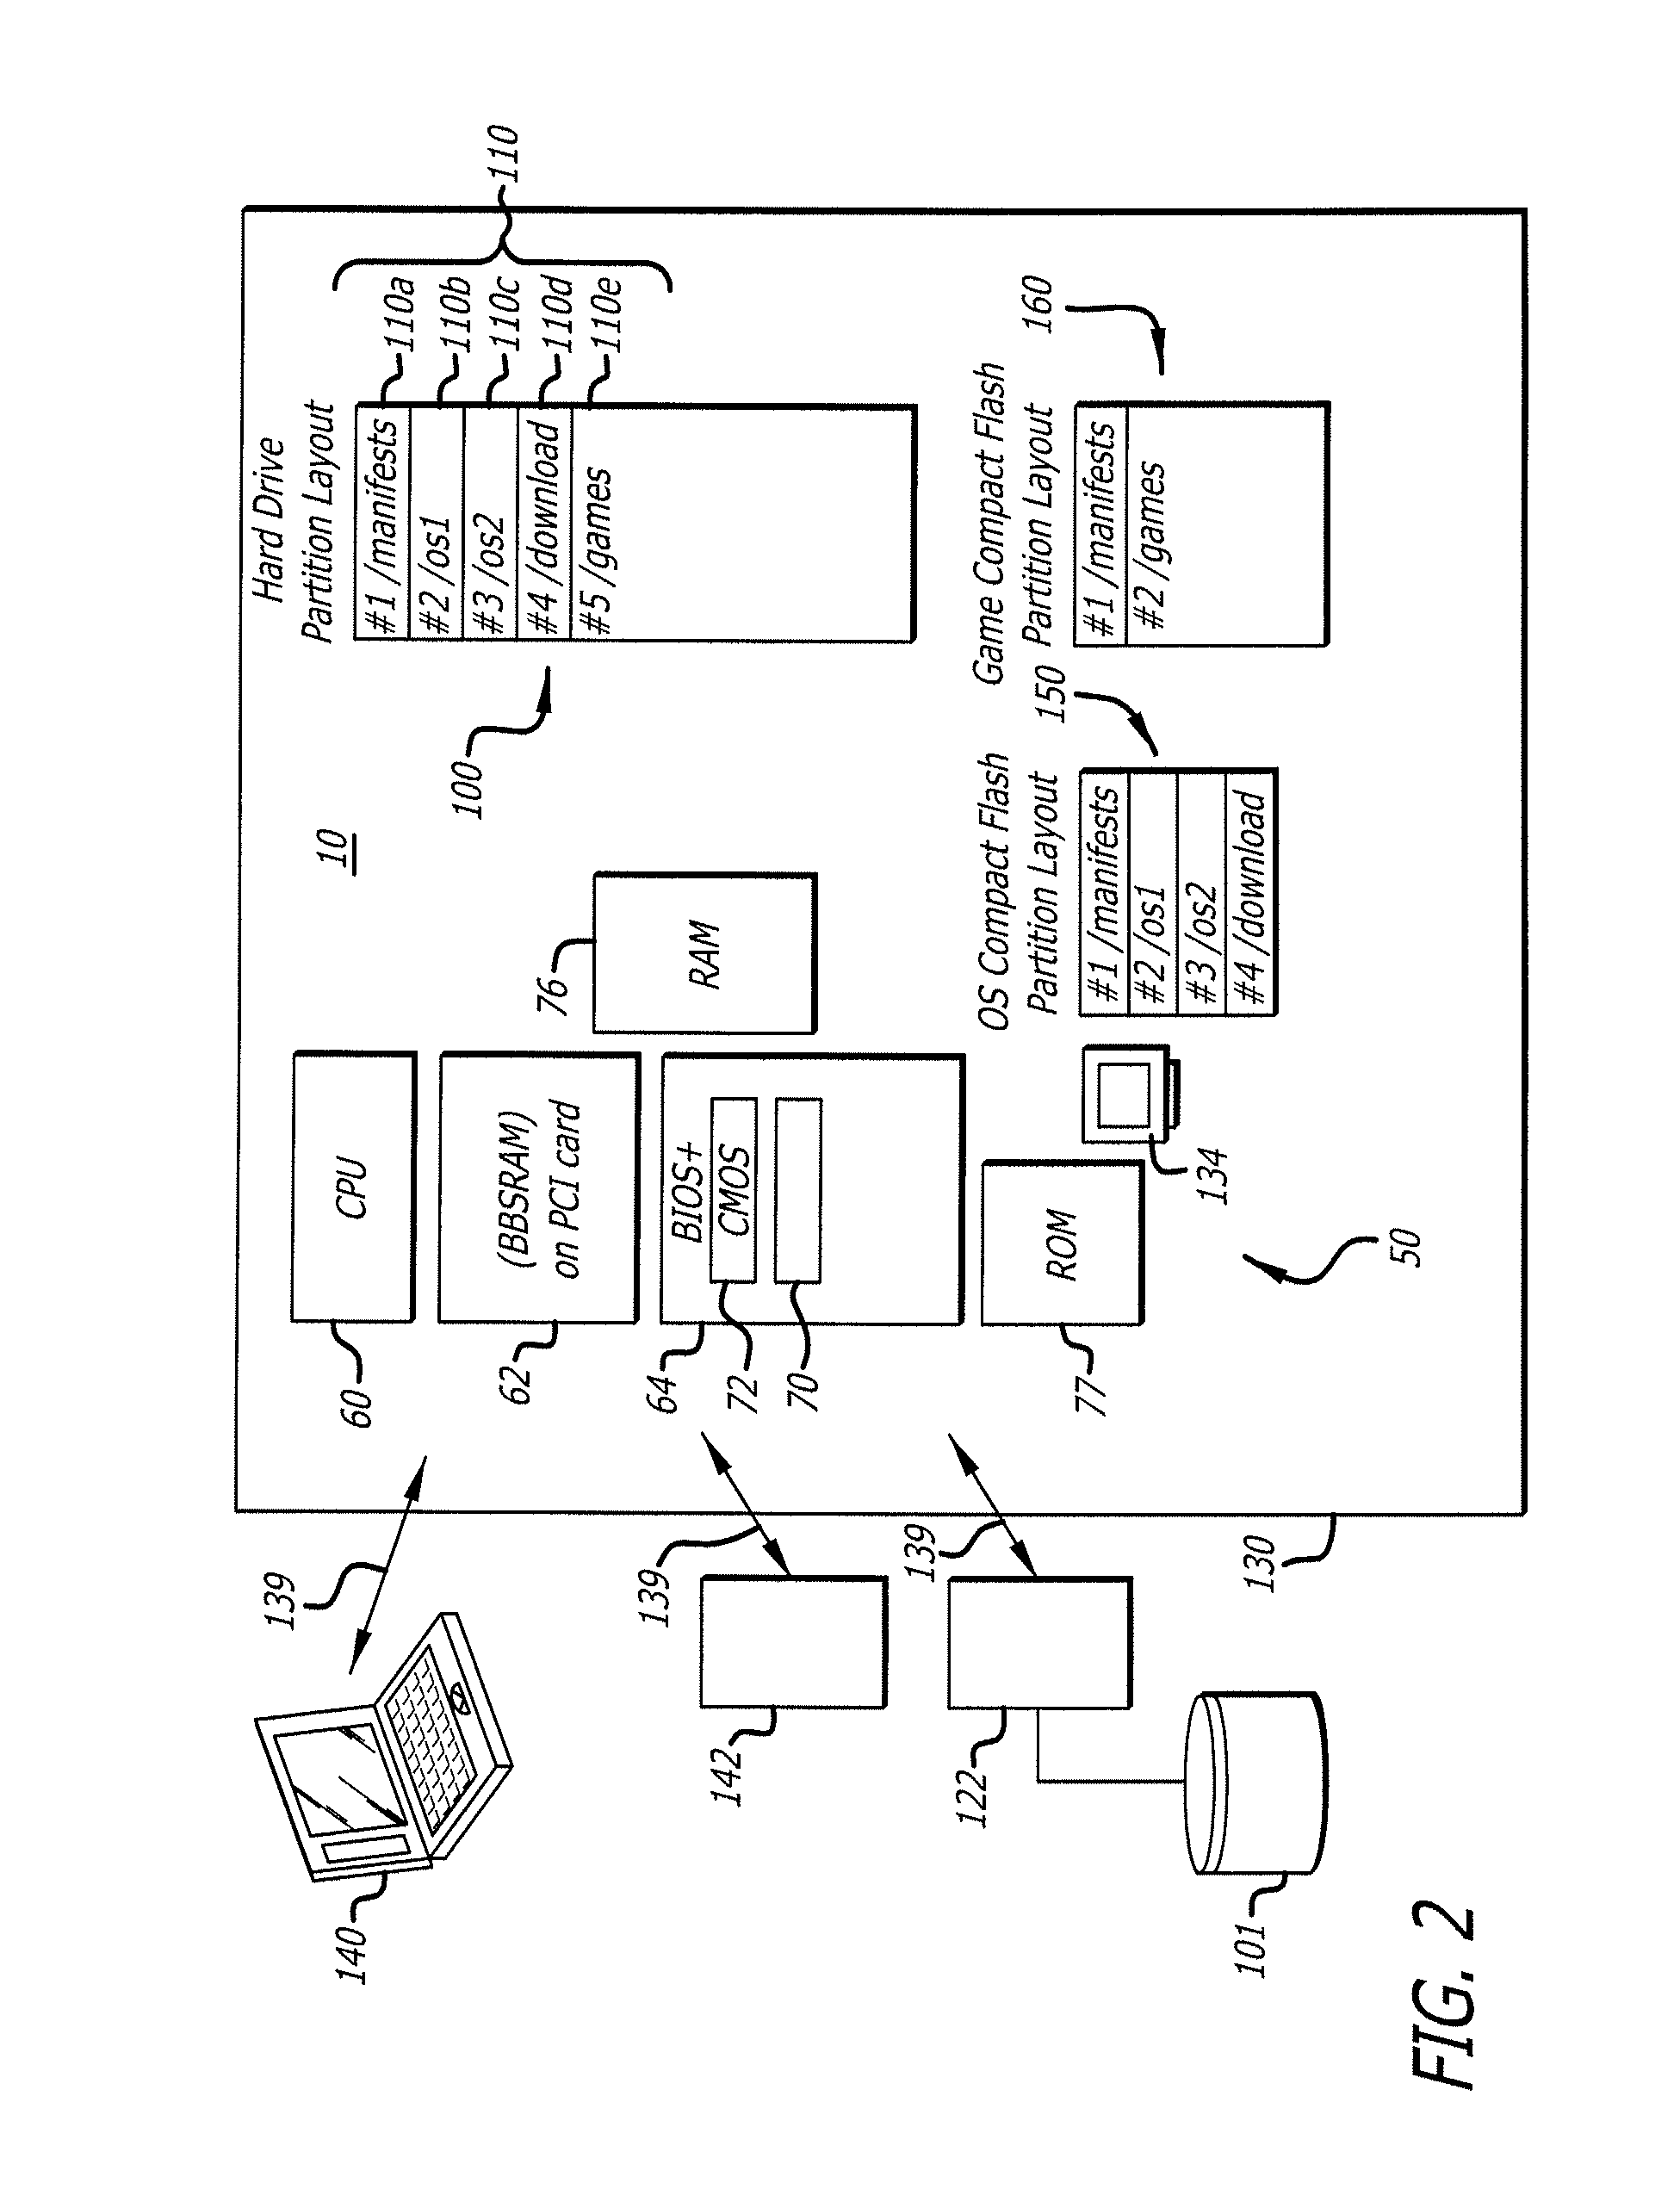 Authentication system for gaming machines